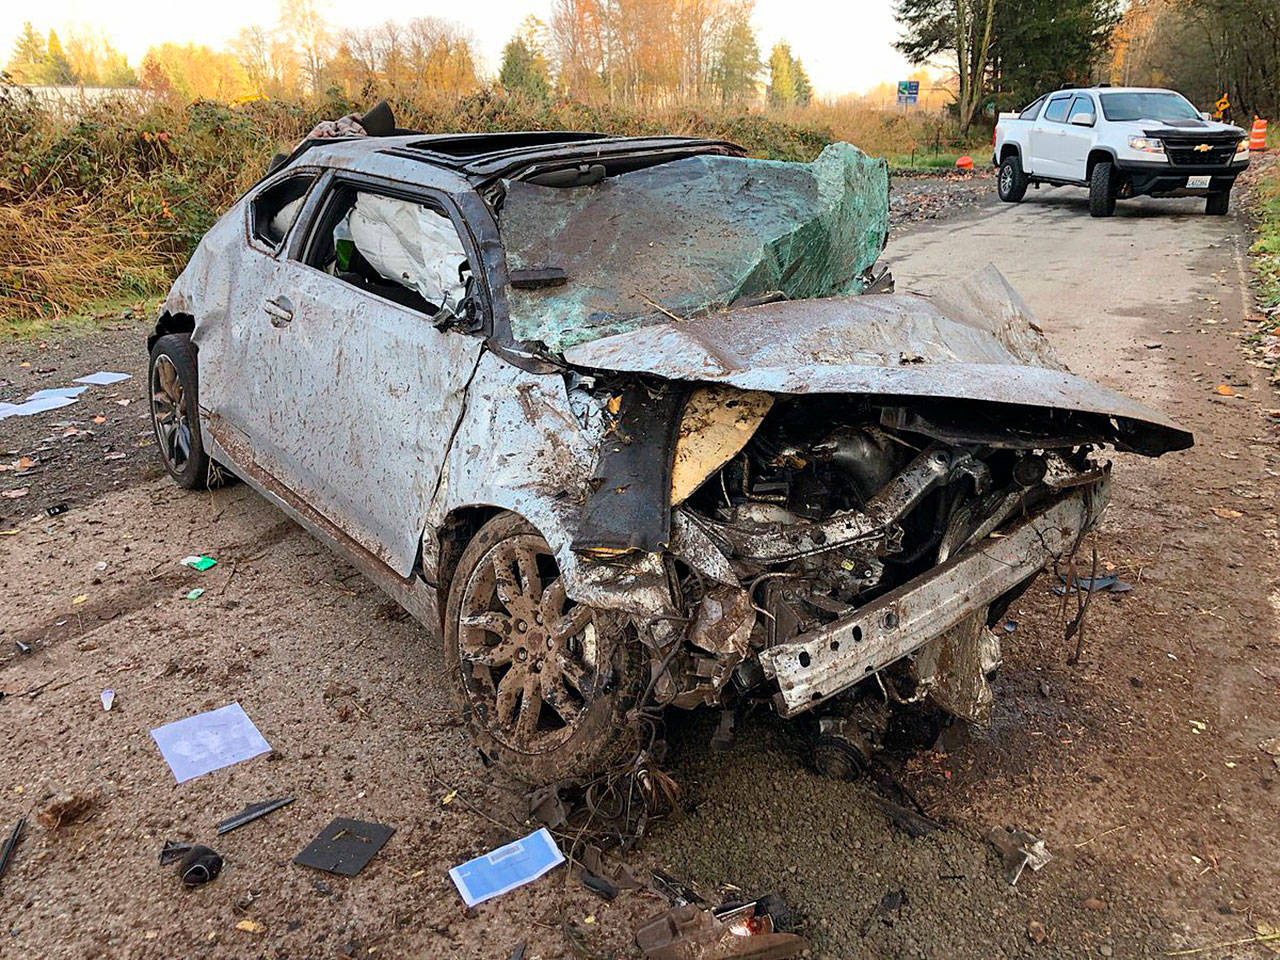 The Washington State Patrol released this photo Tuesday of the single-car crash along Highway 167 in Kent on Sunday that seriously injured the woman driver. COURTESY PHOTO, State Patrol